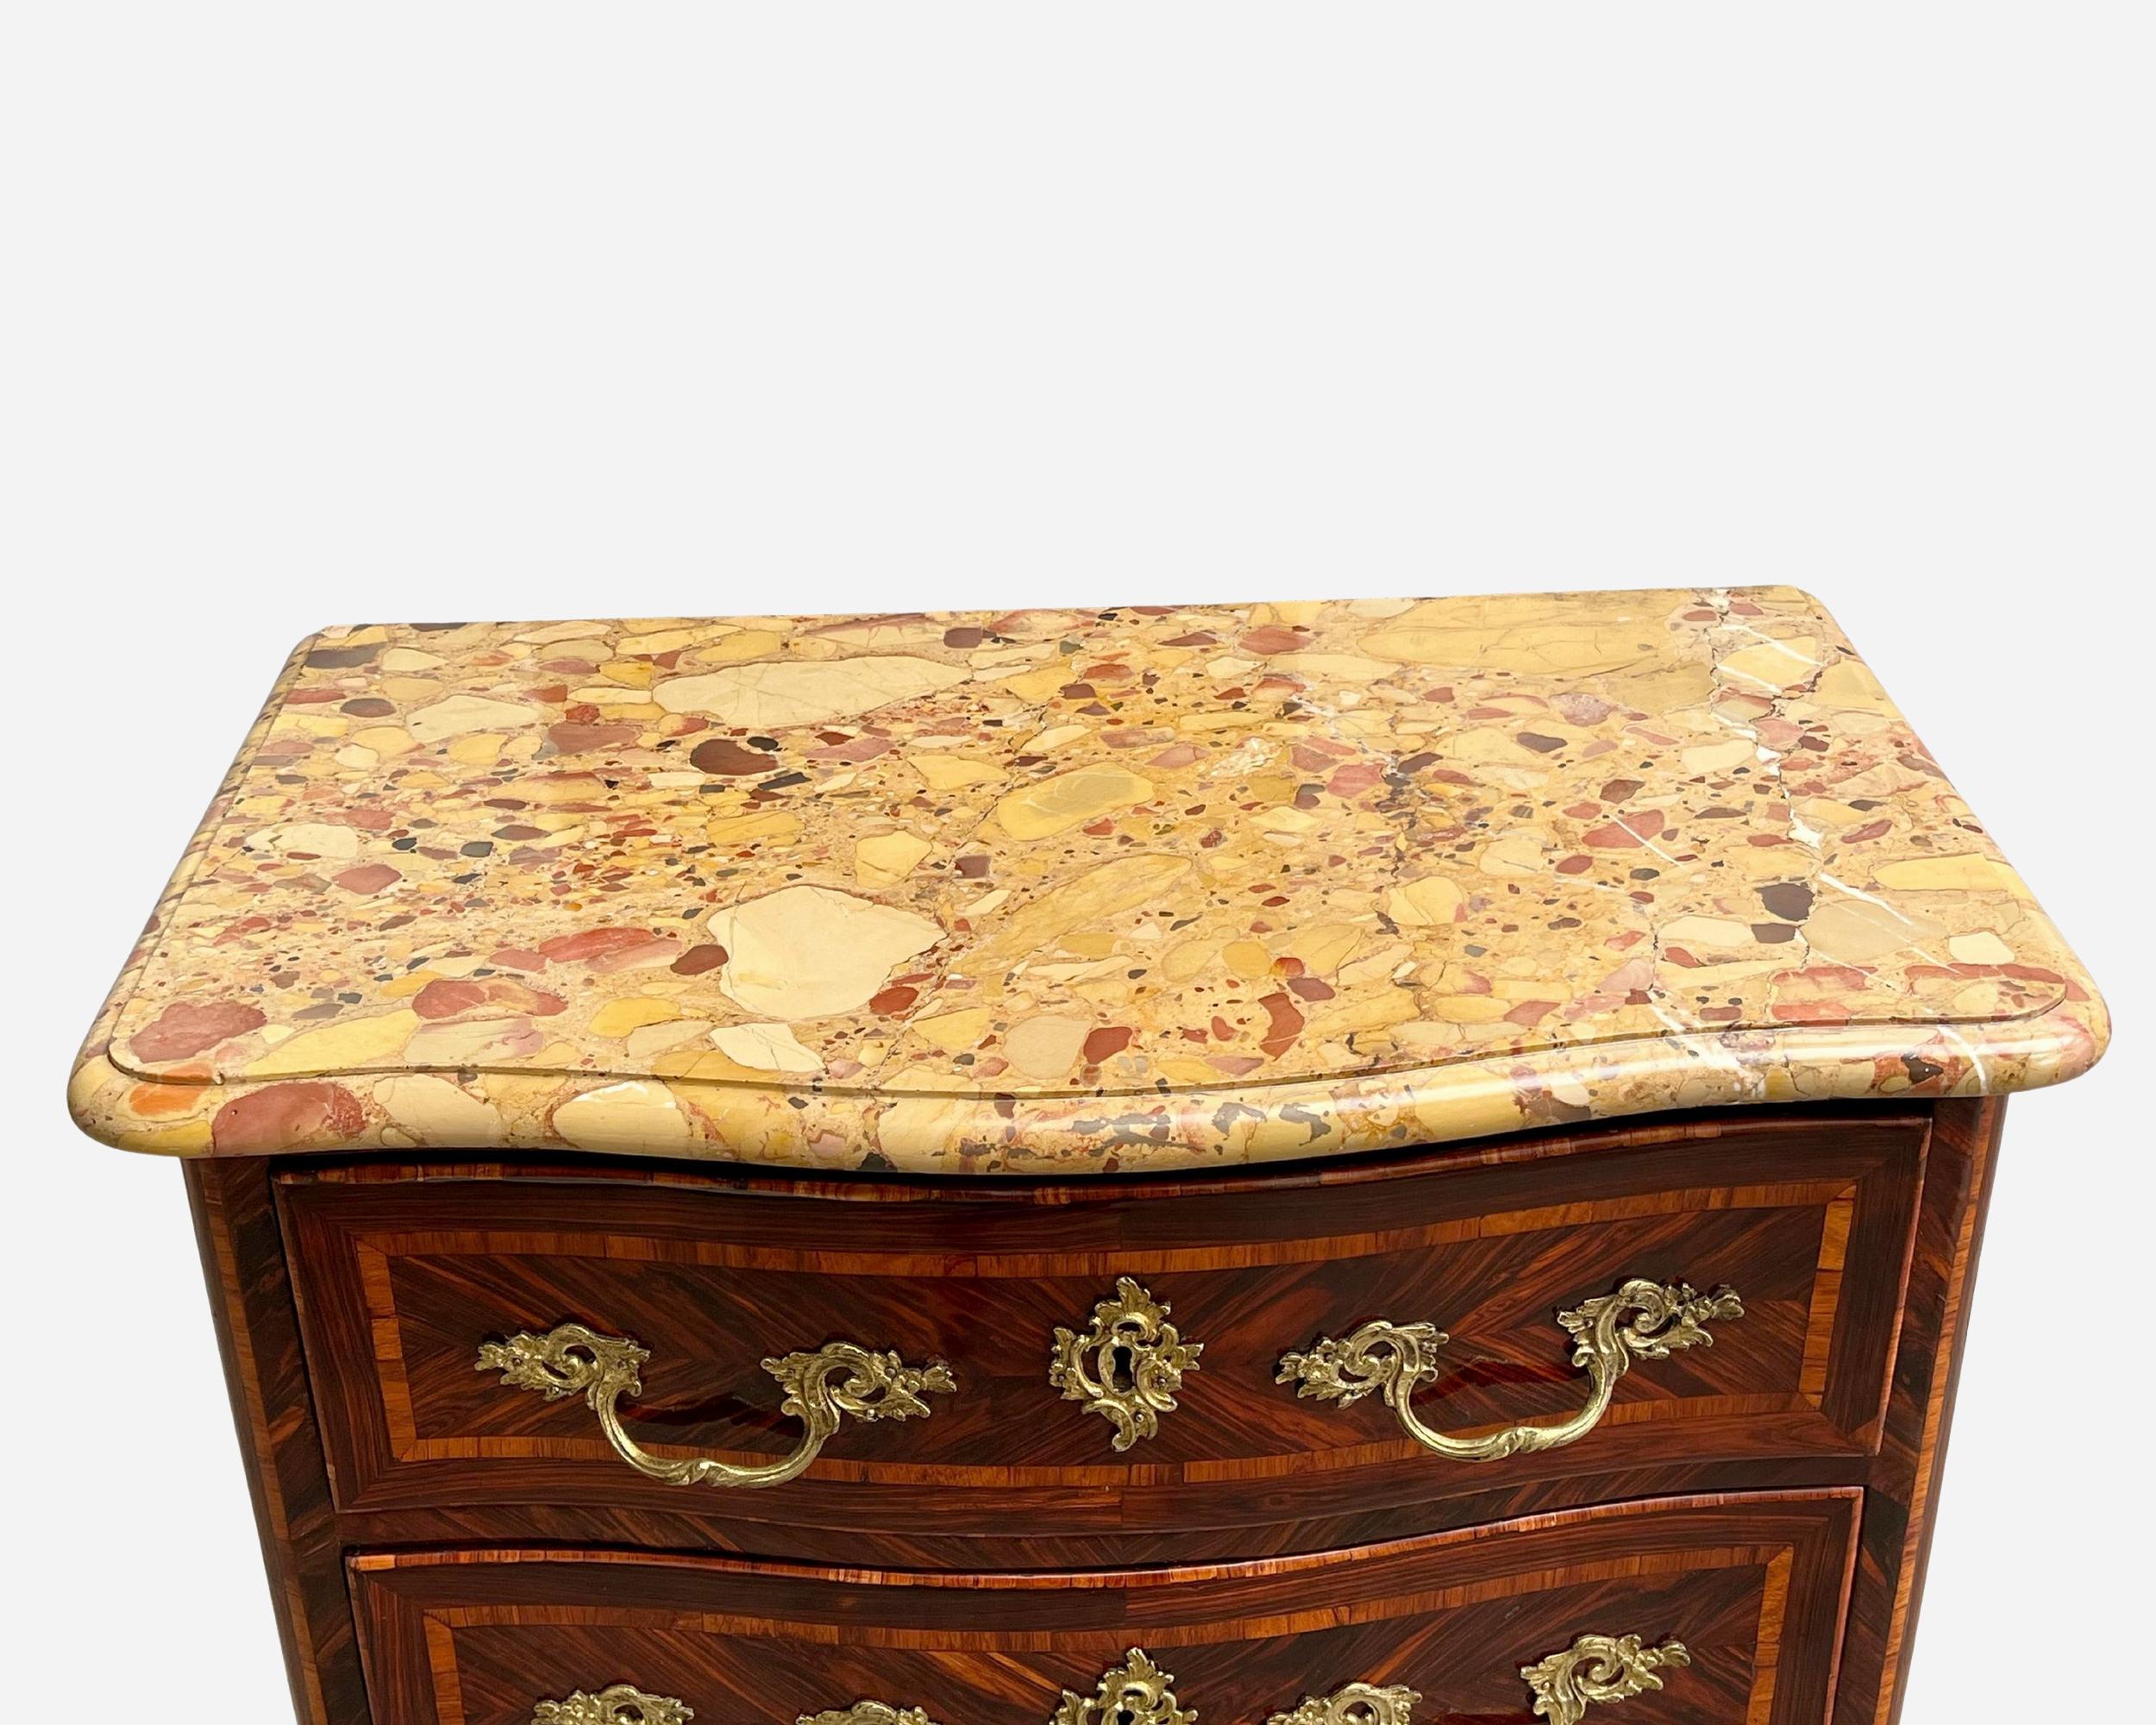 Attractive LXIV-Regence period (1715 / 1723) in-between chest of drawers in several species of precious wood on an solid oak core. Original top in Aleppo breccia marble and original lock escutcheons and bronzes.
Width without marble: 72 cm (28.4